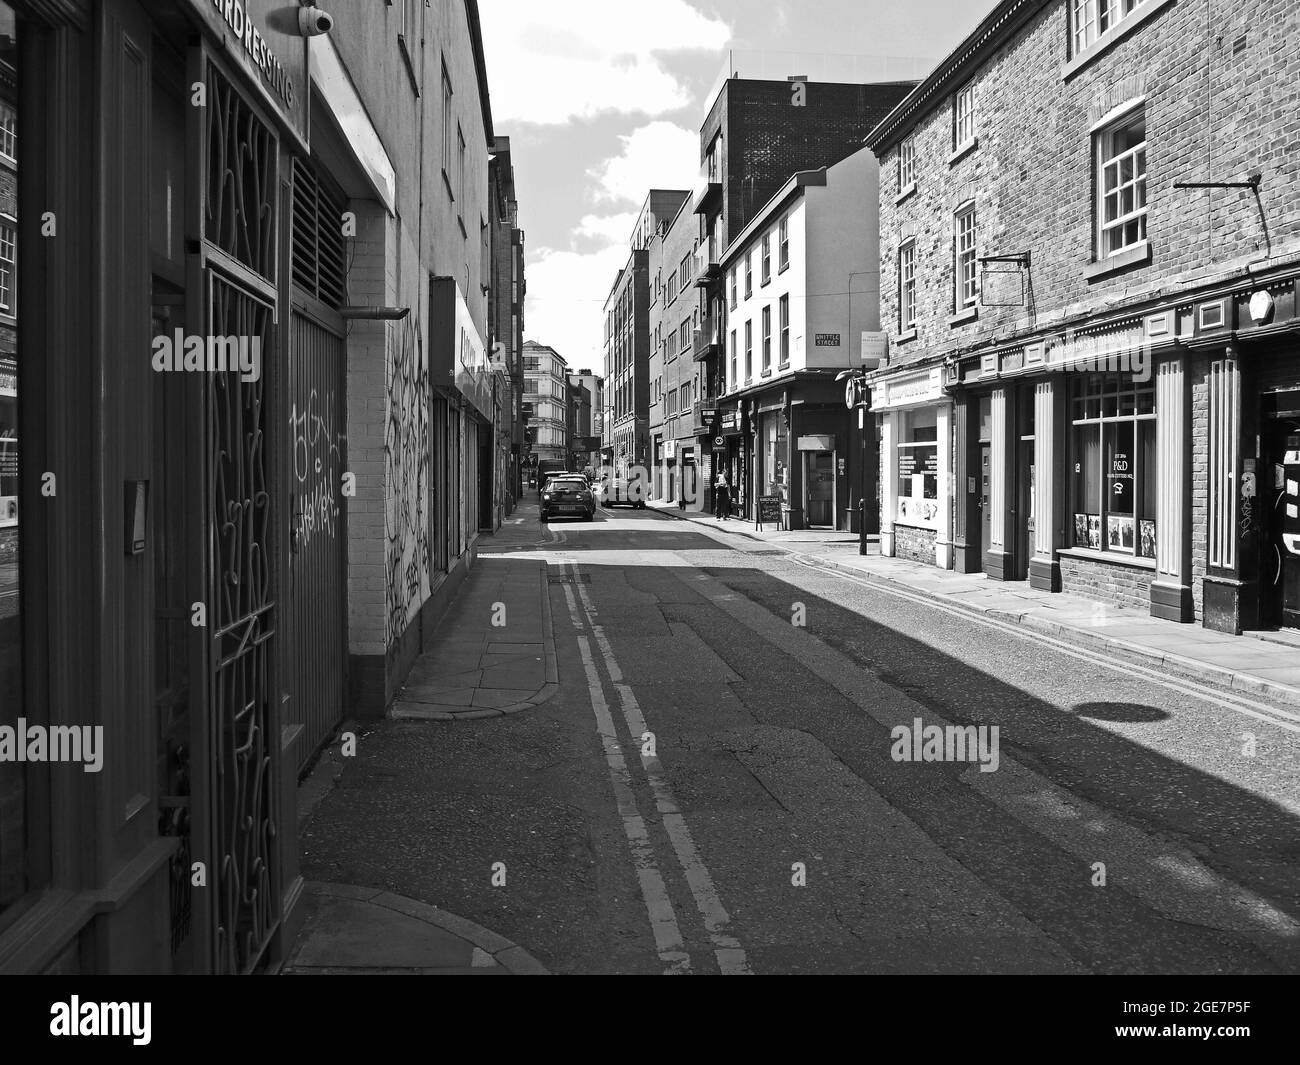 MANCHESTER. GREATER MANCHESTER. ENGLAND. 07-15-21. Tib Street in the city's Northern Quarter, shop fronts and businesses. Stock Photo